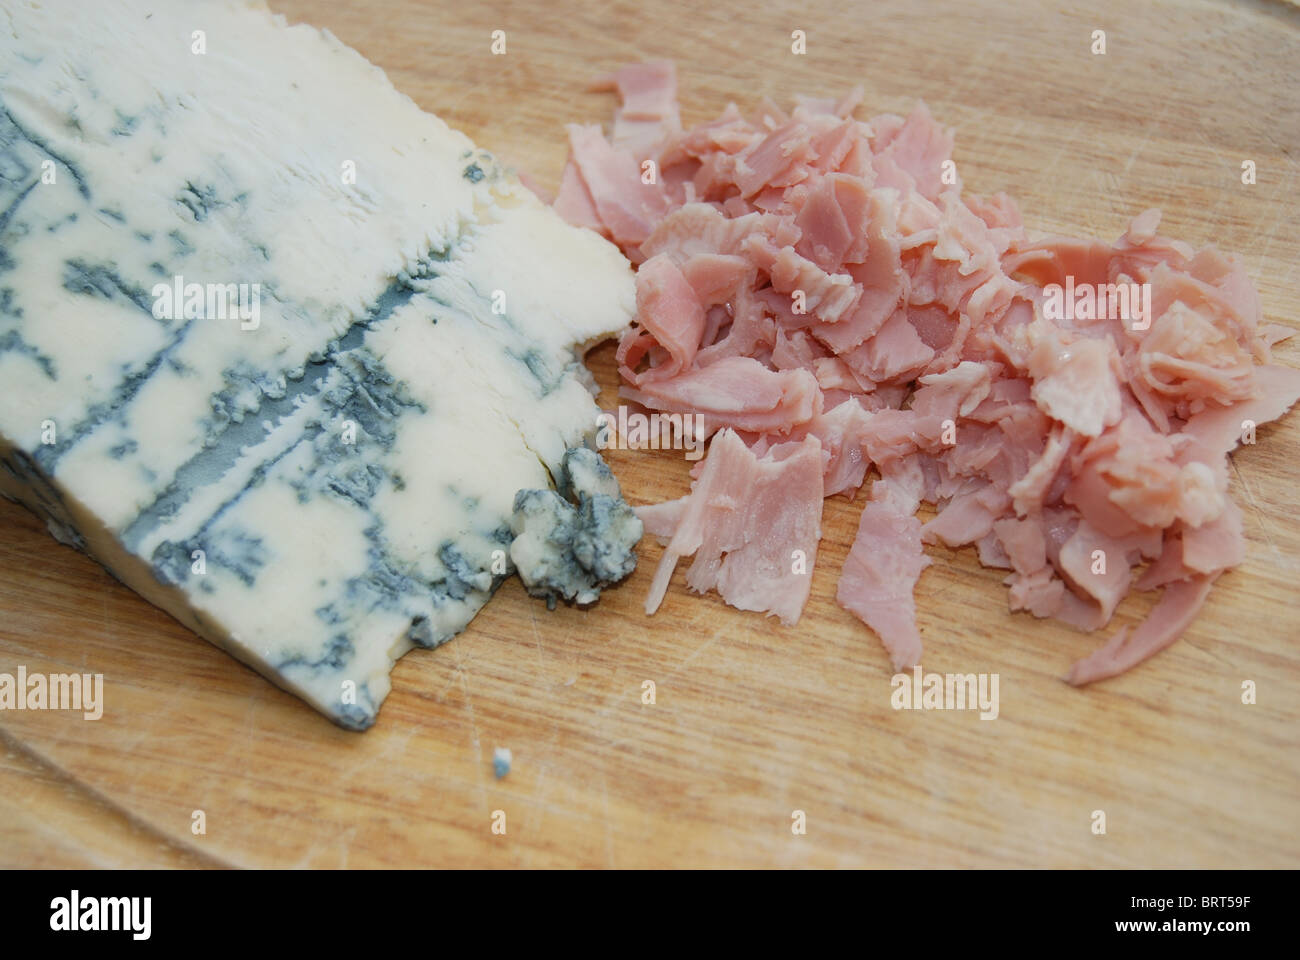 gorgonzola, typical aromatic italian cheese, and cooked ham Stock Photo